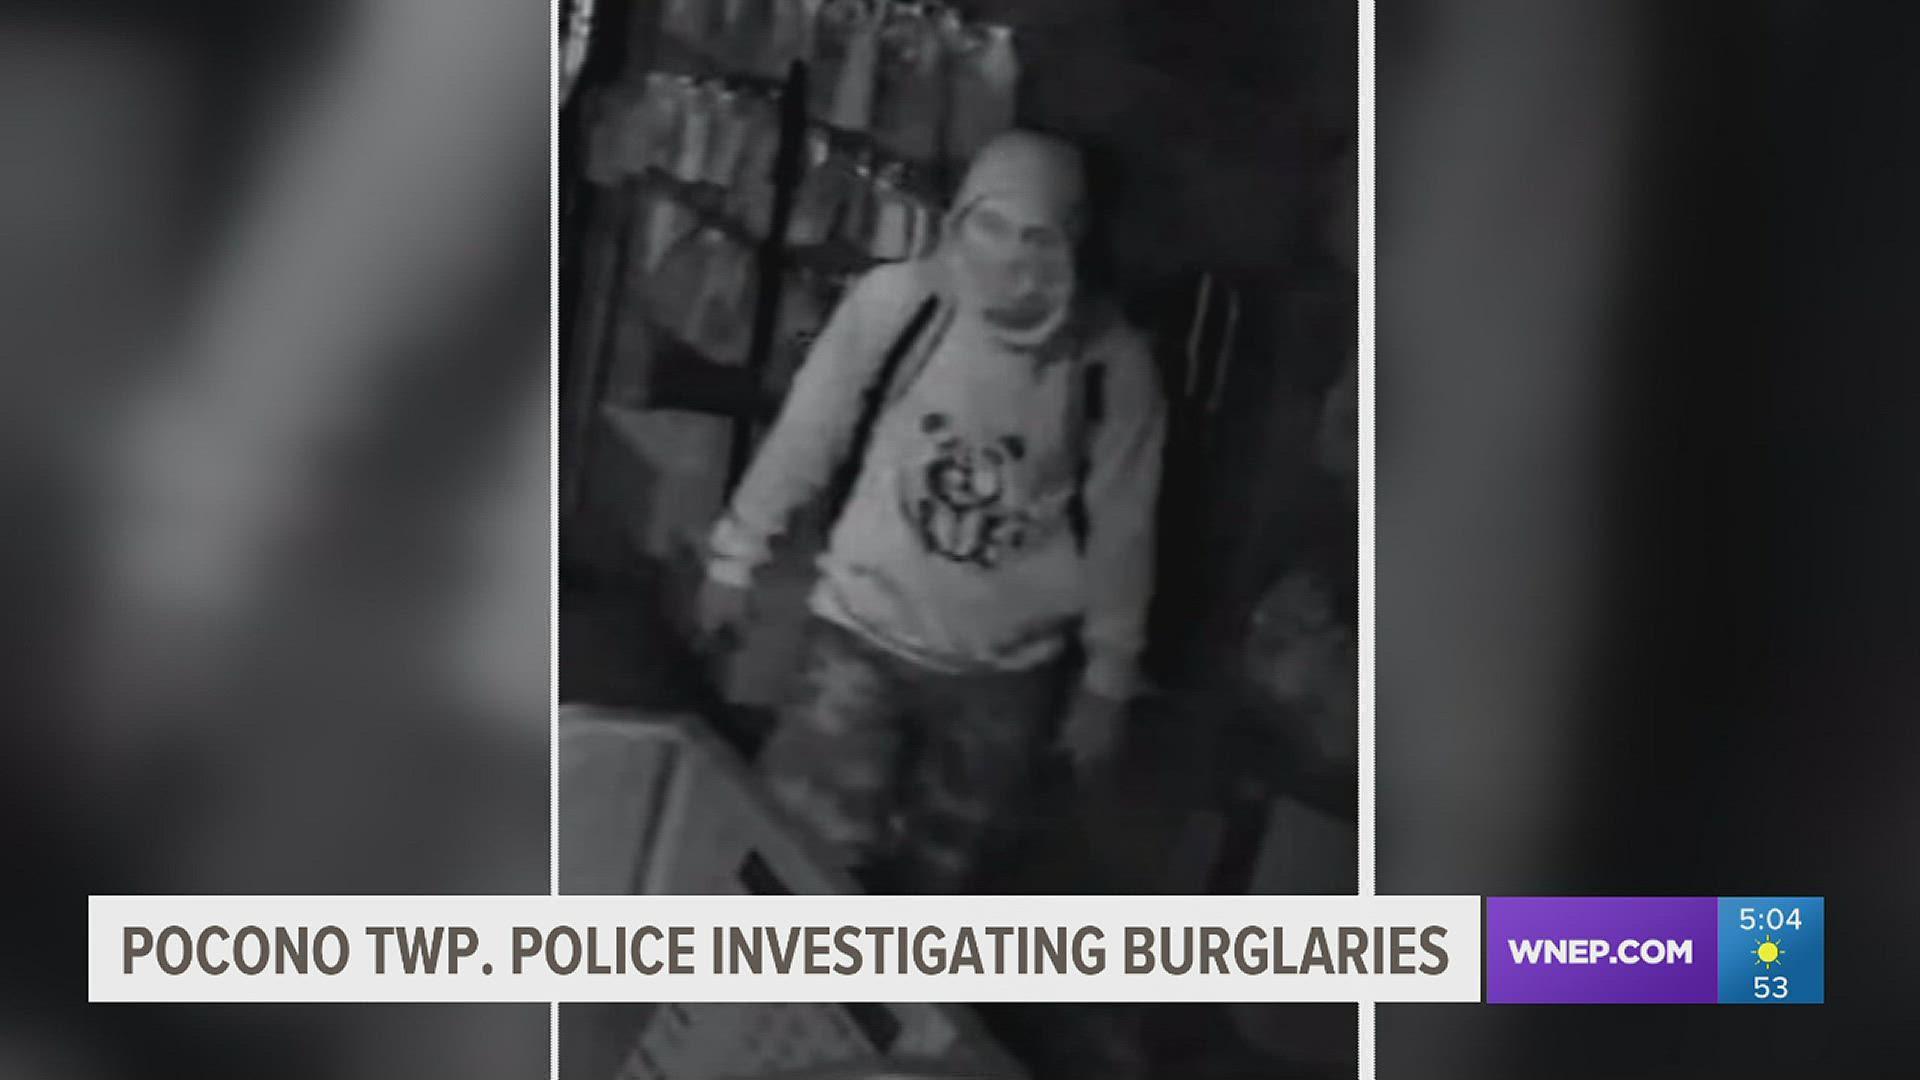 Police in the Poconos are trying to figure out who is responsible for break-ins at businesses near Bartonsville.